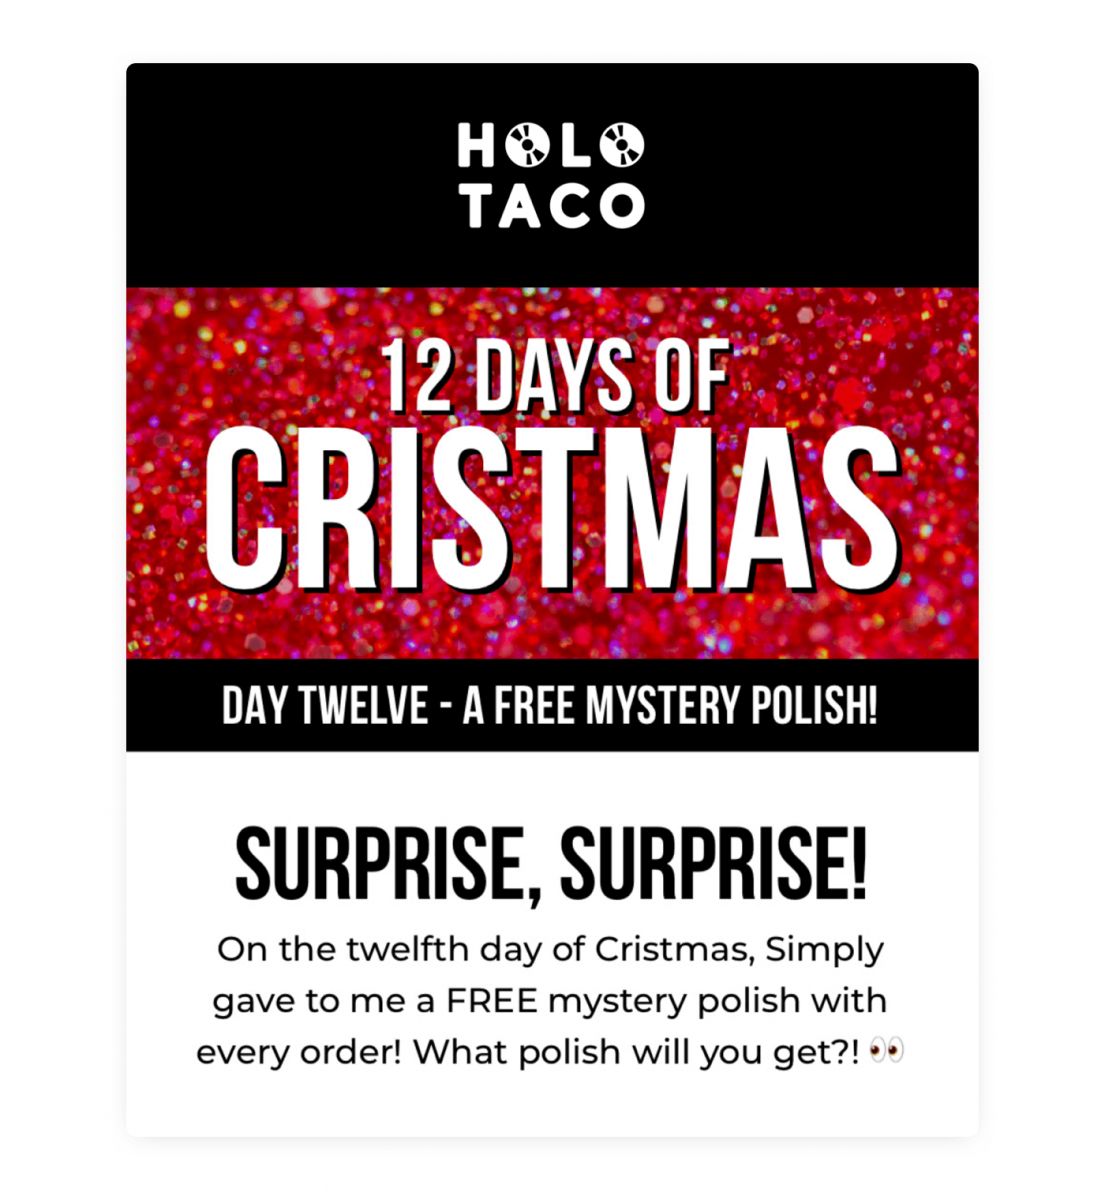 An example of effective customer retention strategy from Holo Taco